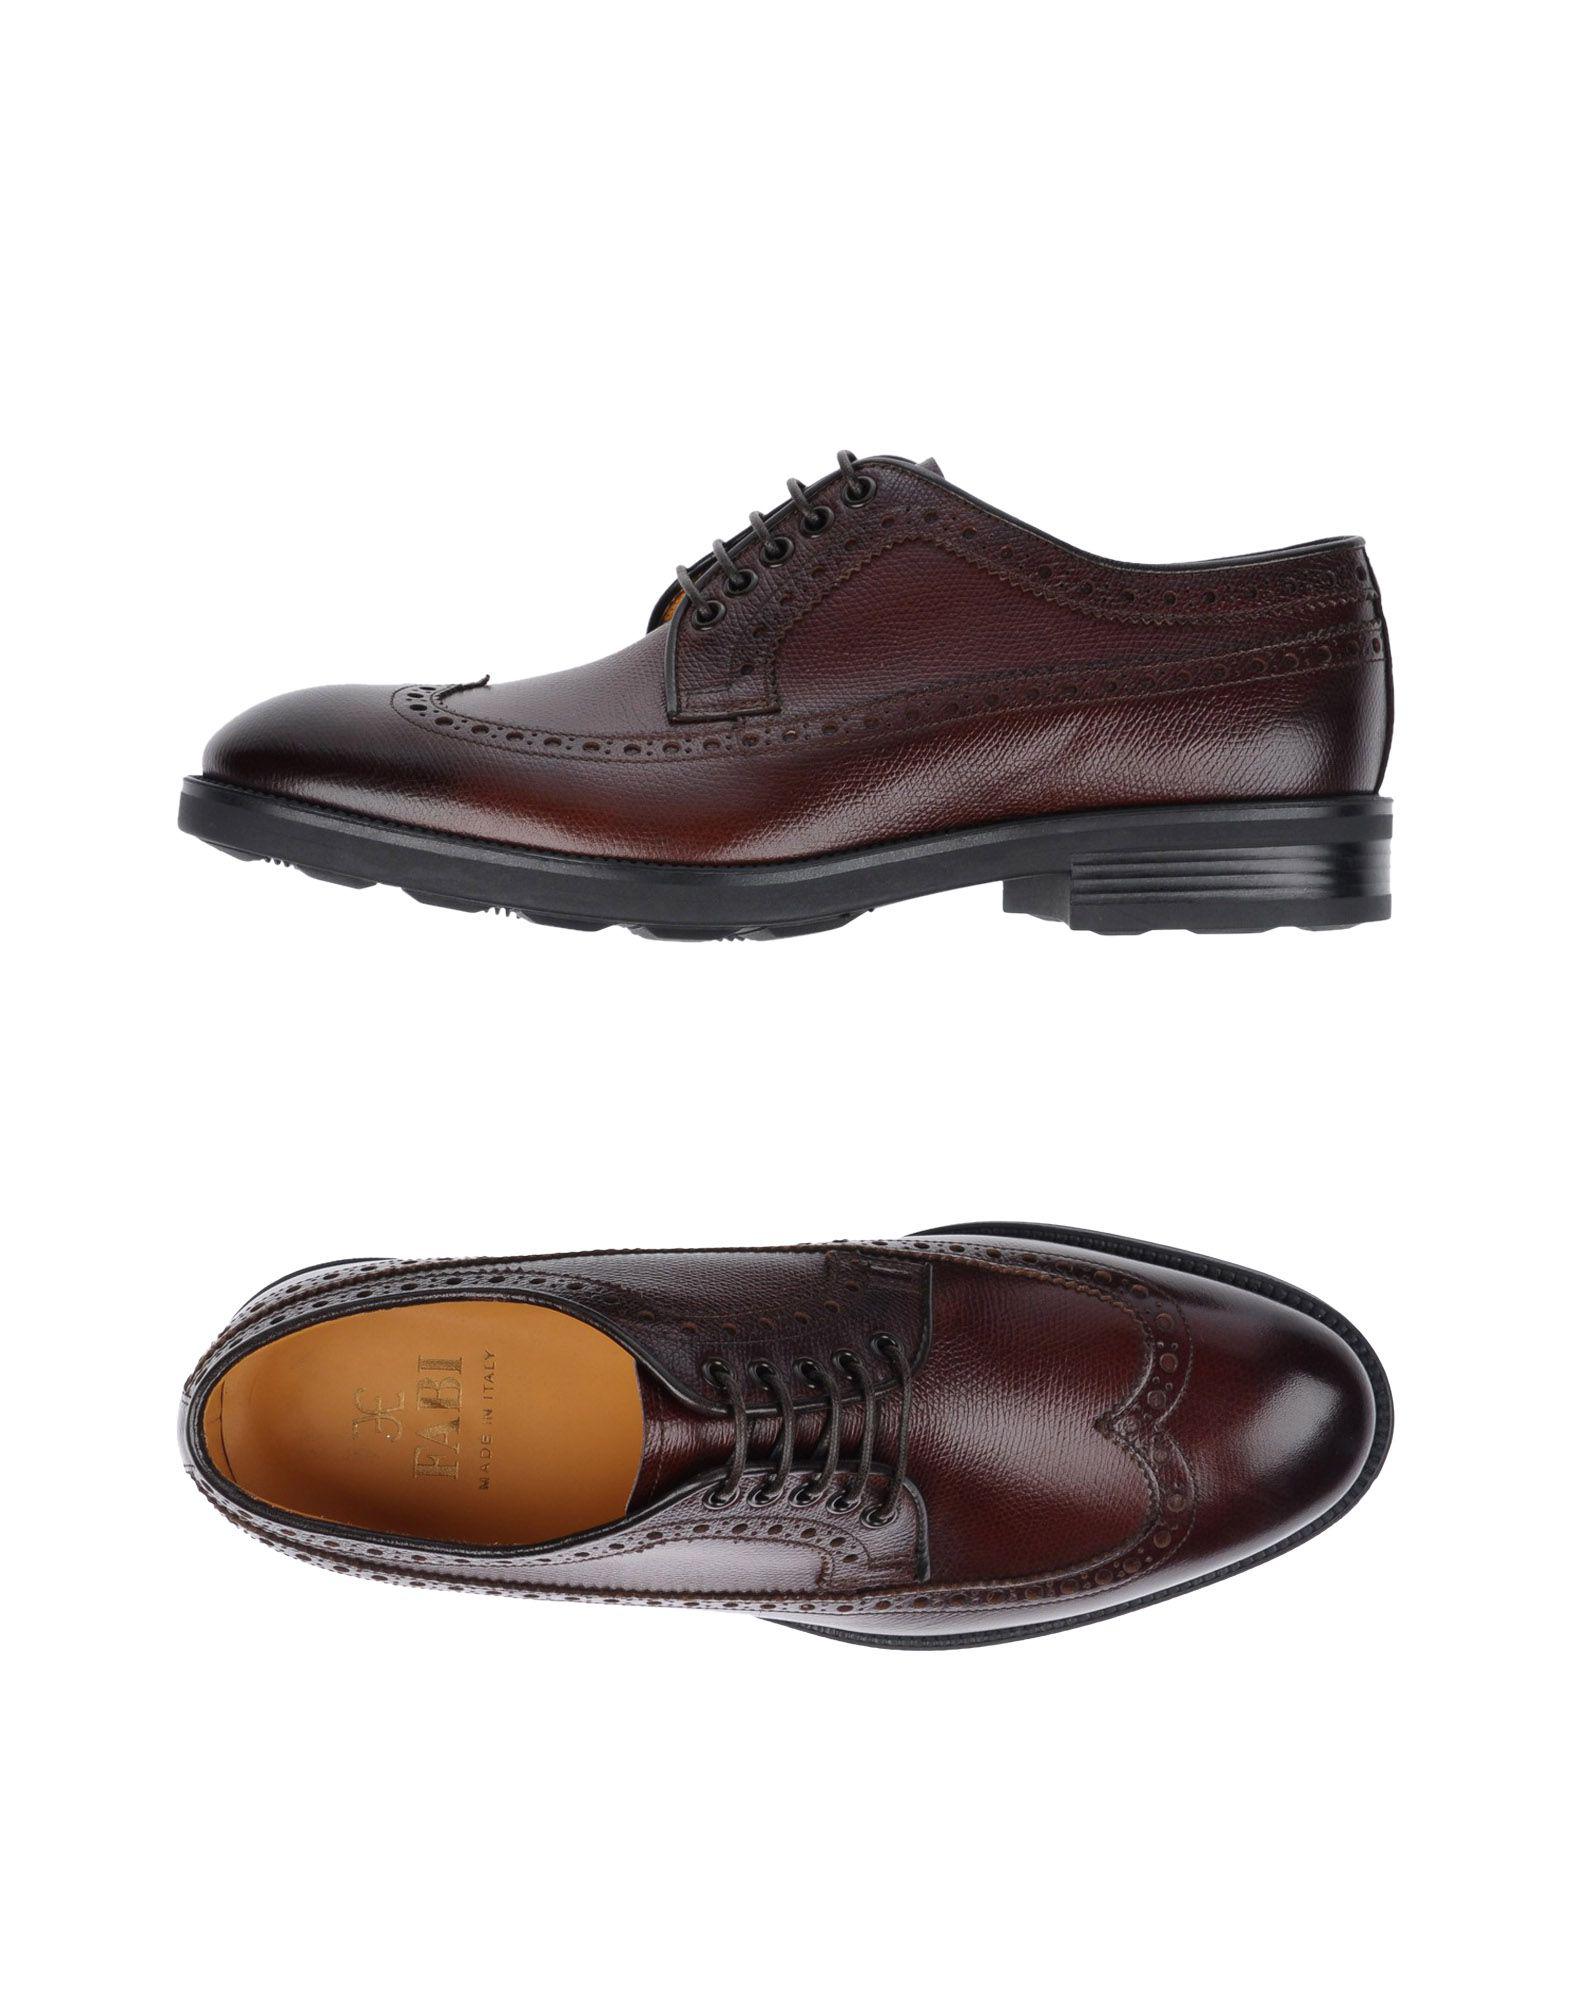 Fabi Leather Lace-up Shoe in Maroon (Brown) for Men - Lyst